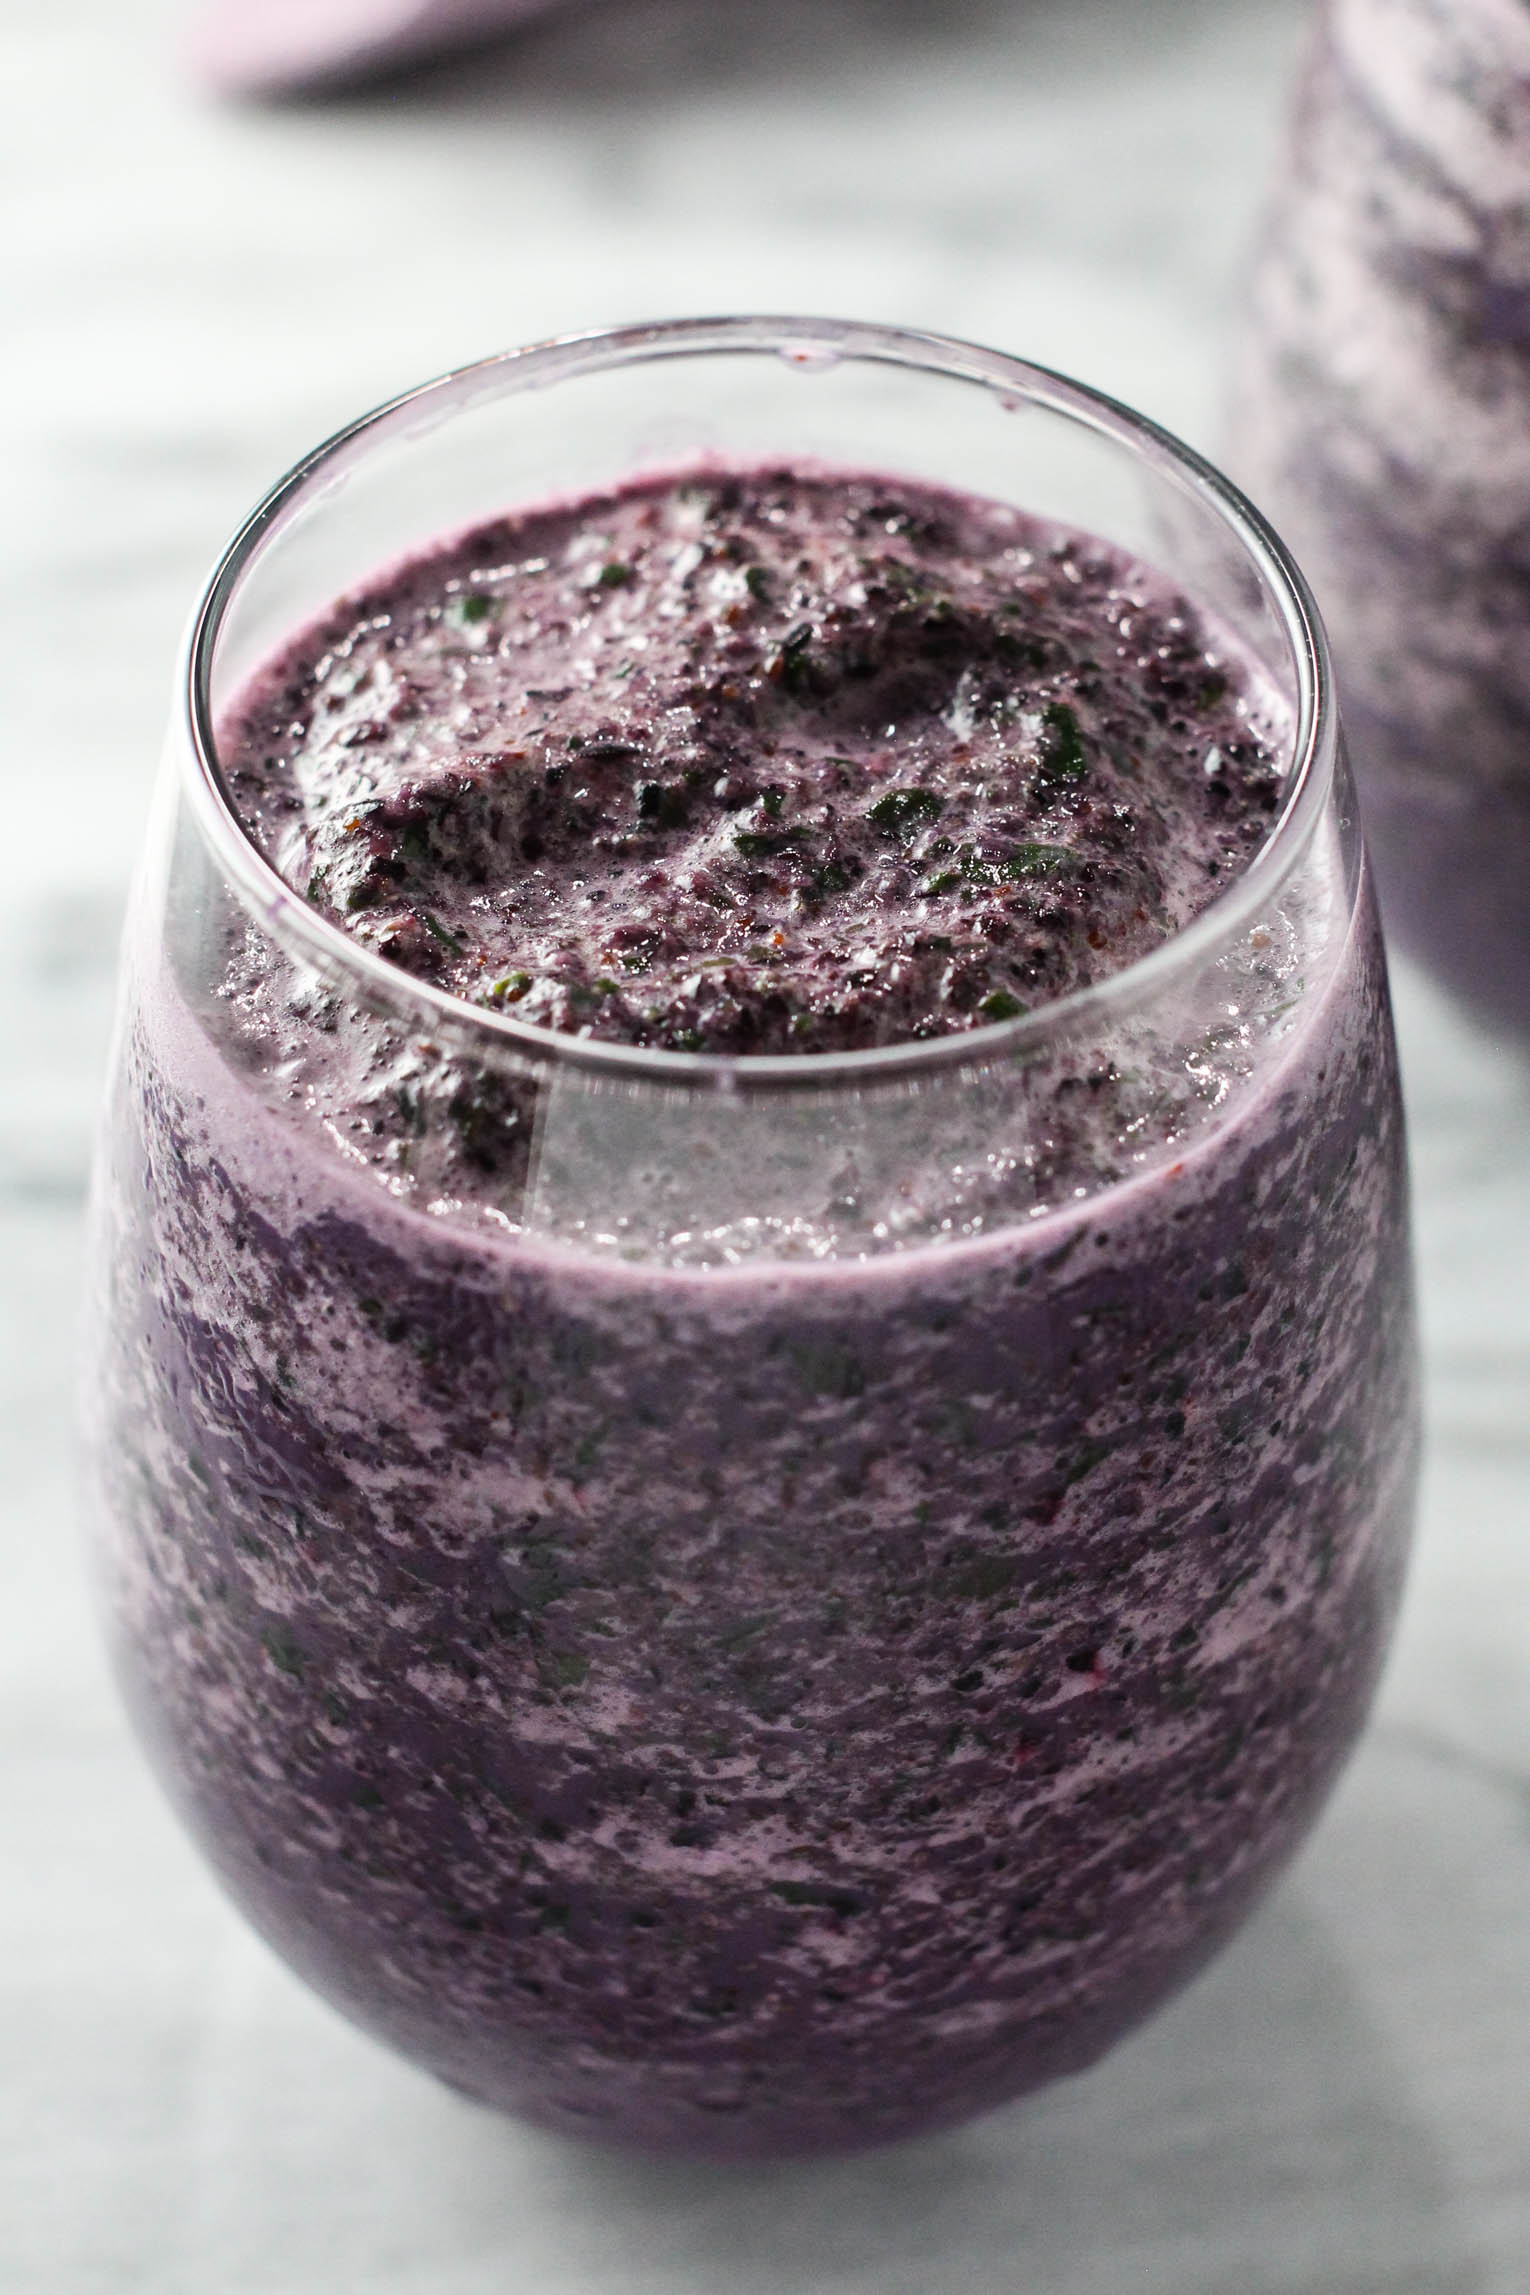 Close up shot of the blueberry kale smoothie in a glass.